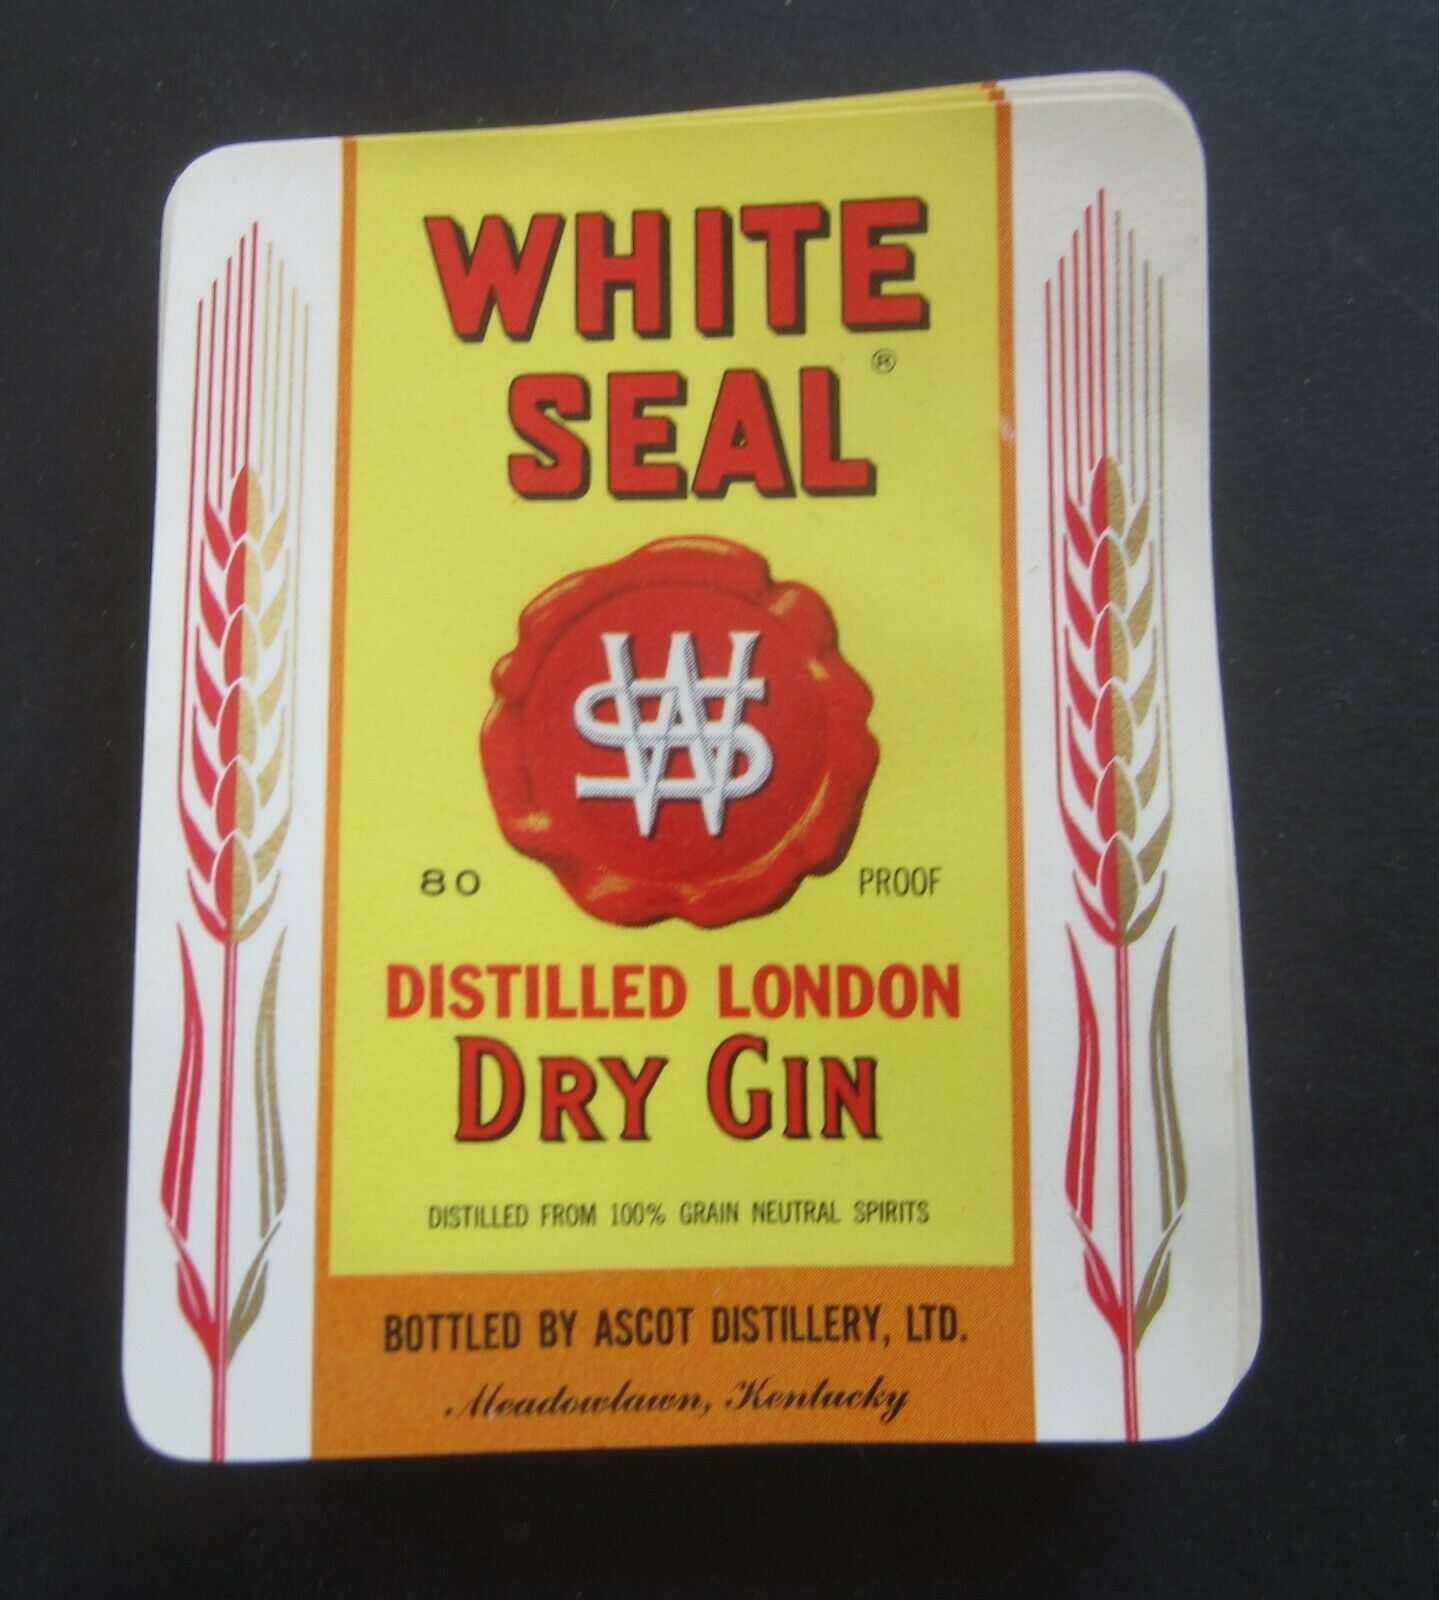  Lot of 100 - Old Vintage WHITE SEAL - GIN Labe...